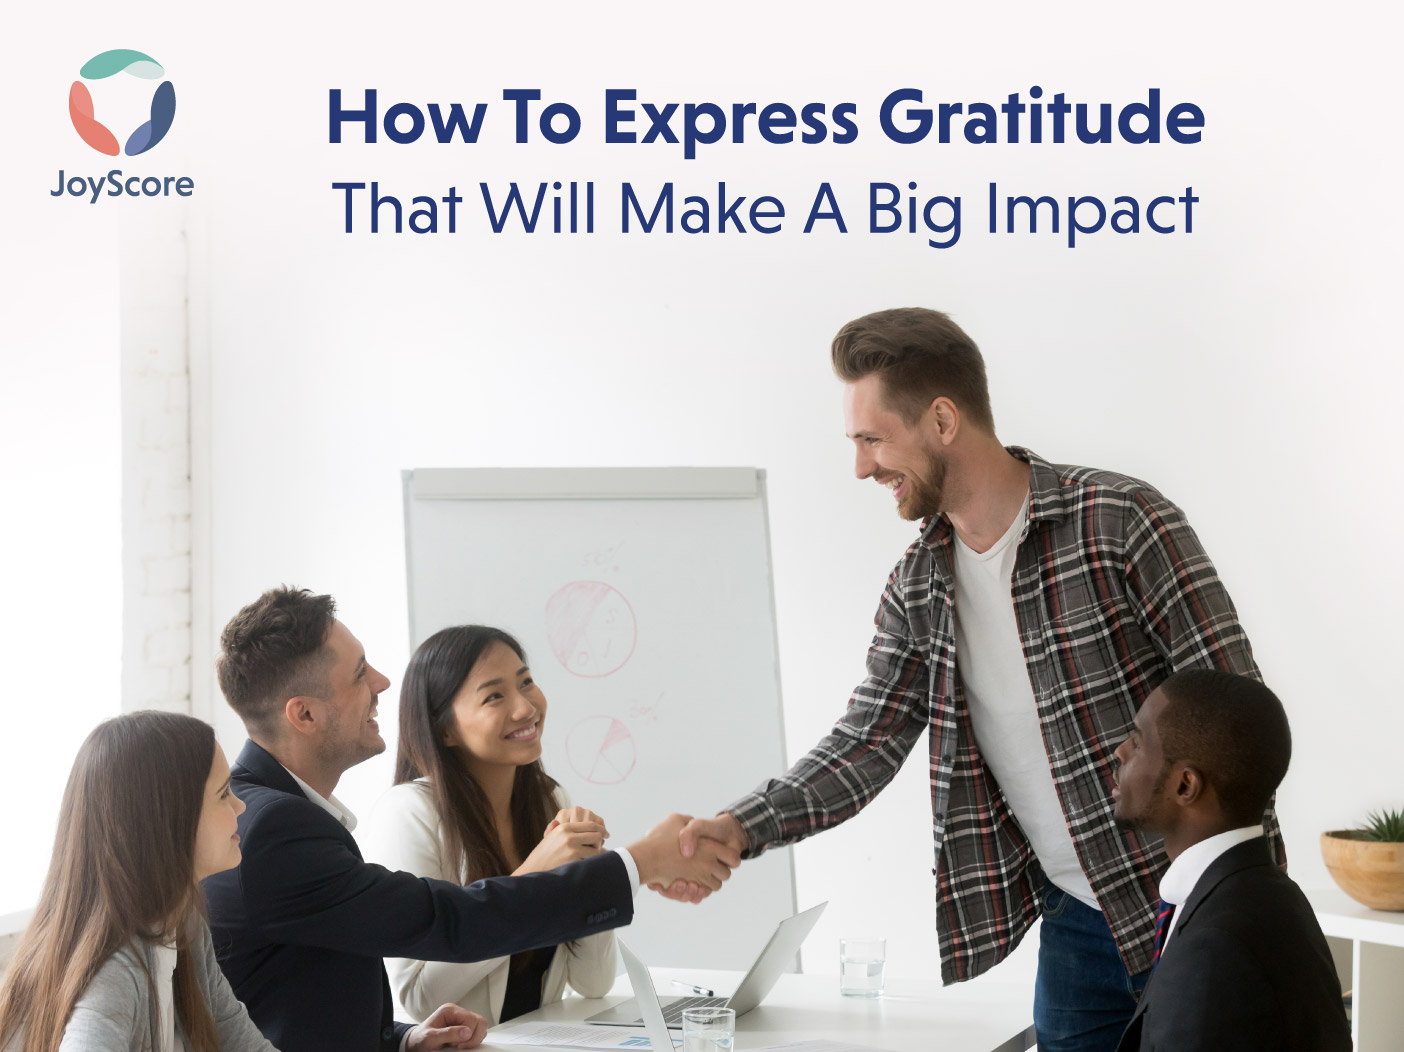 12 Tips On How To Express Gratitude That Will Make A Big Impact